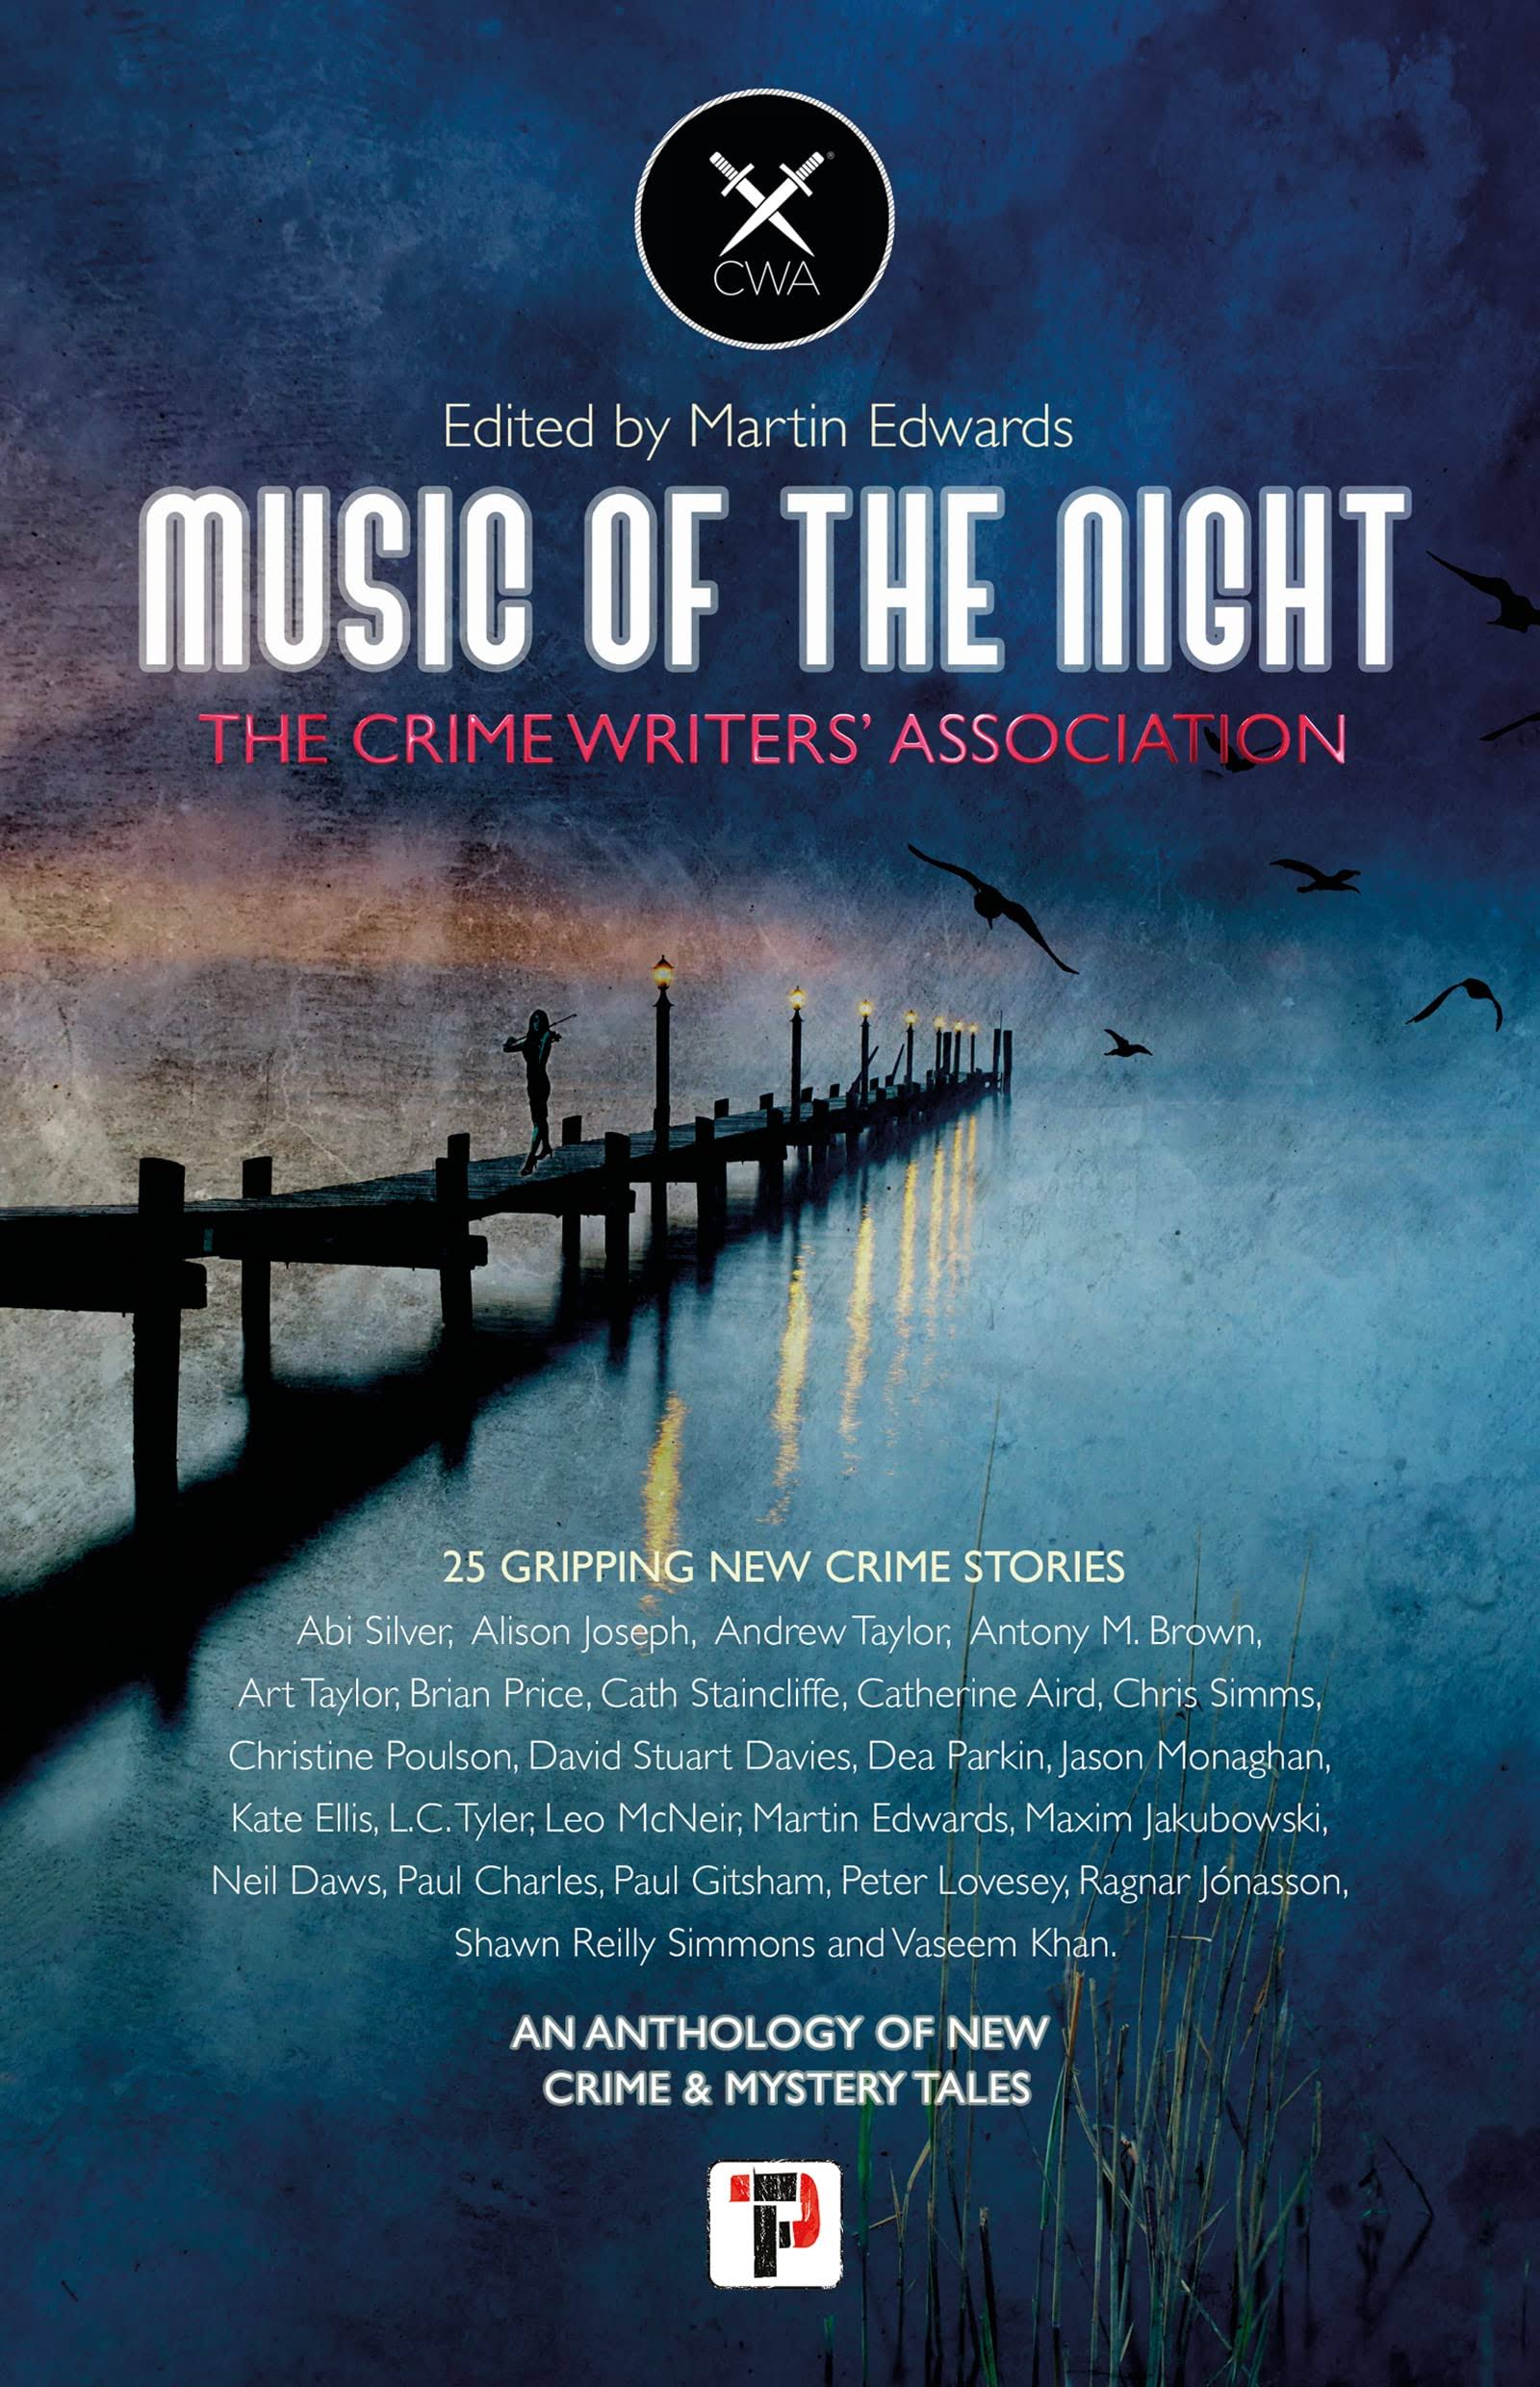 Music of the Night by Martin Edwards